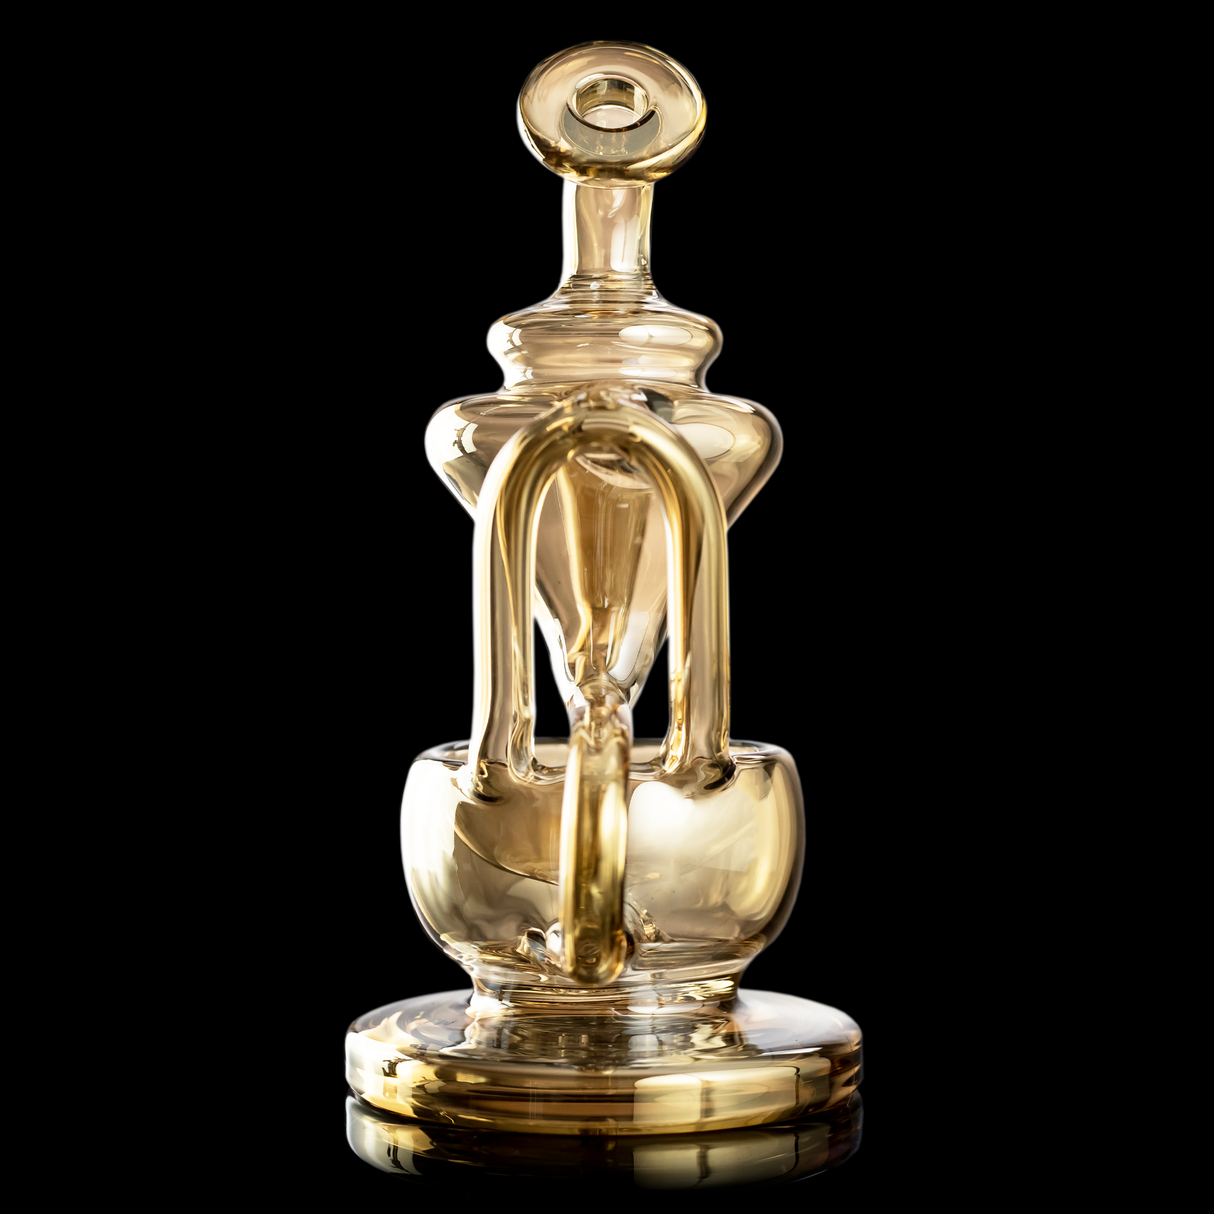 MJ Arsenal Gold Claude Mini Rig LE, compact recycler design for concentrates, 90-degree joint